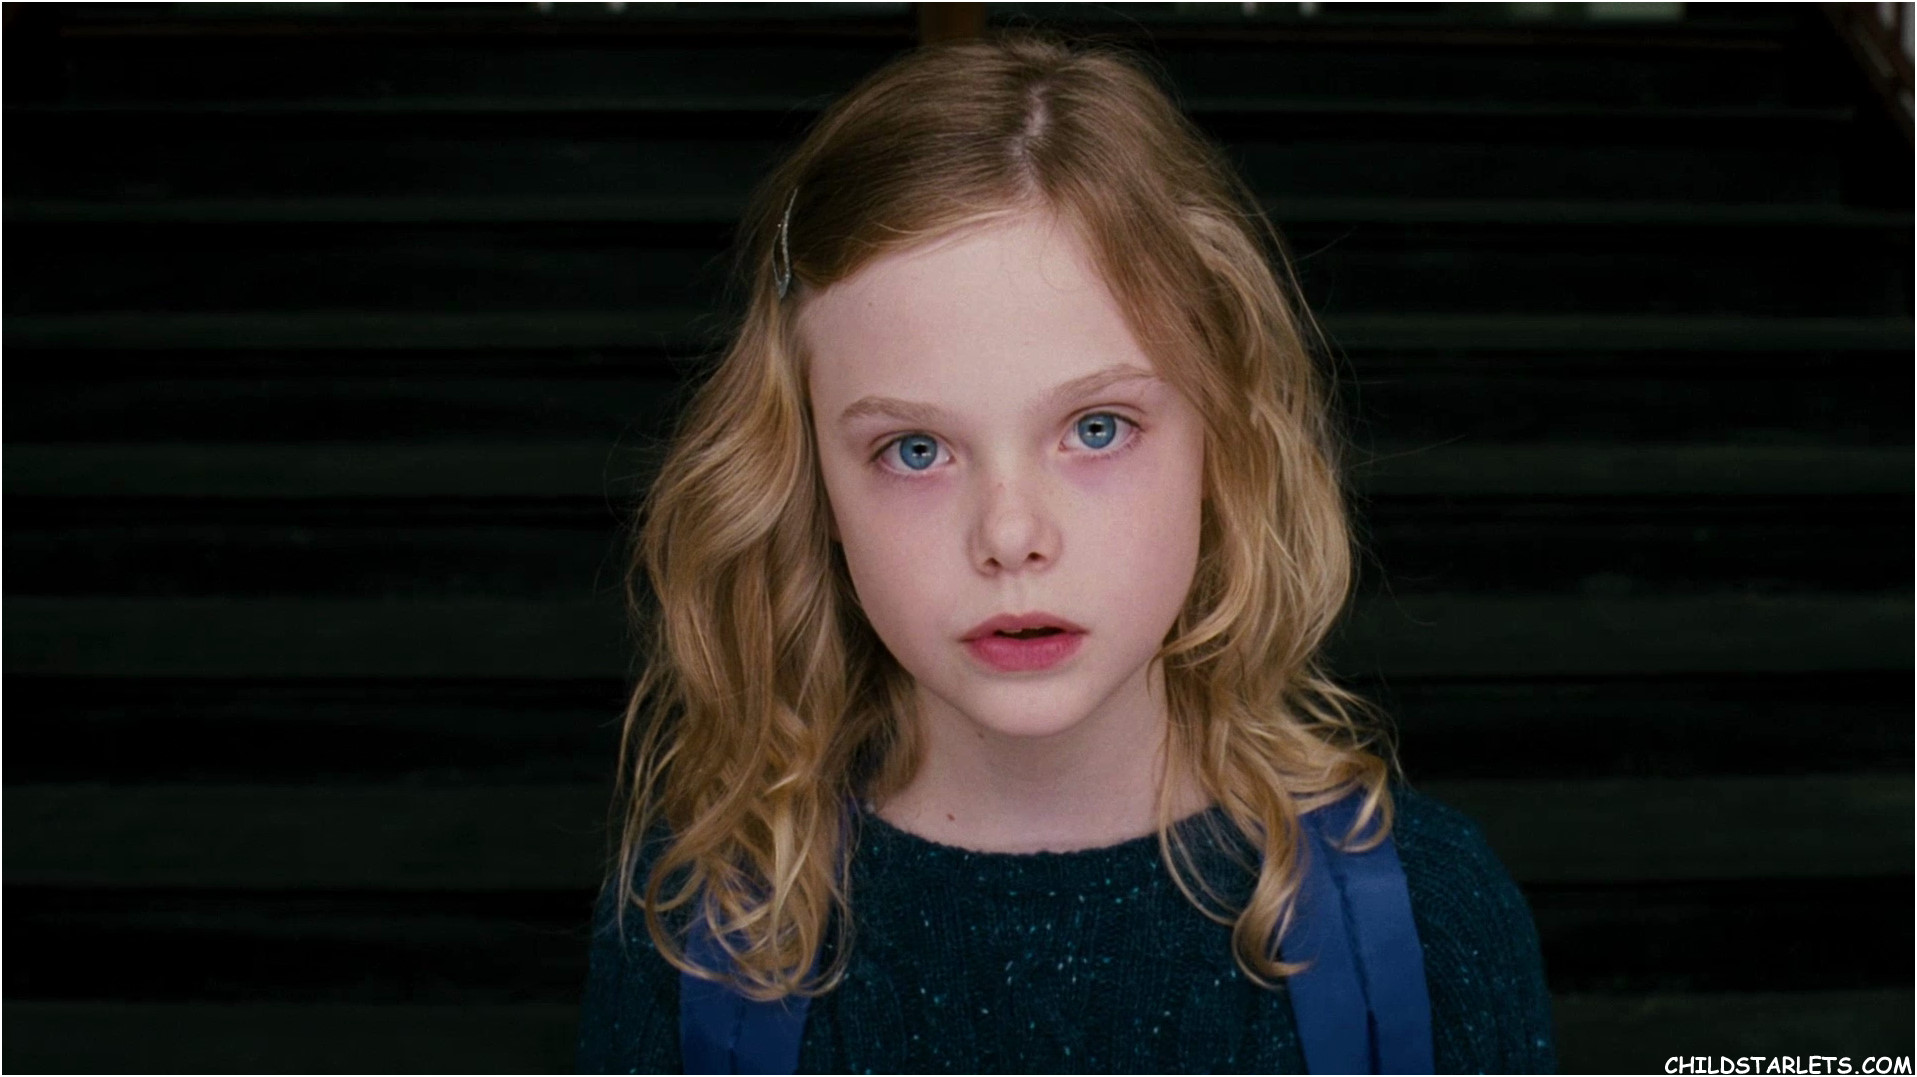 Elle Fanning Child Actress Images/Pictures/Photos/Videos Gallery - CHILDSTARLETS.COM